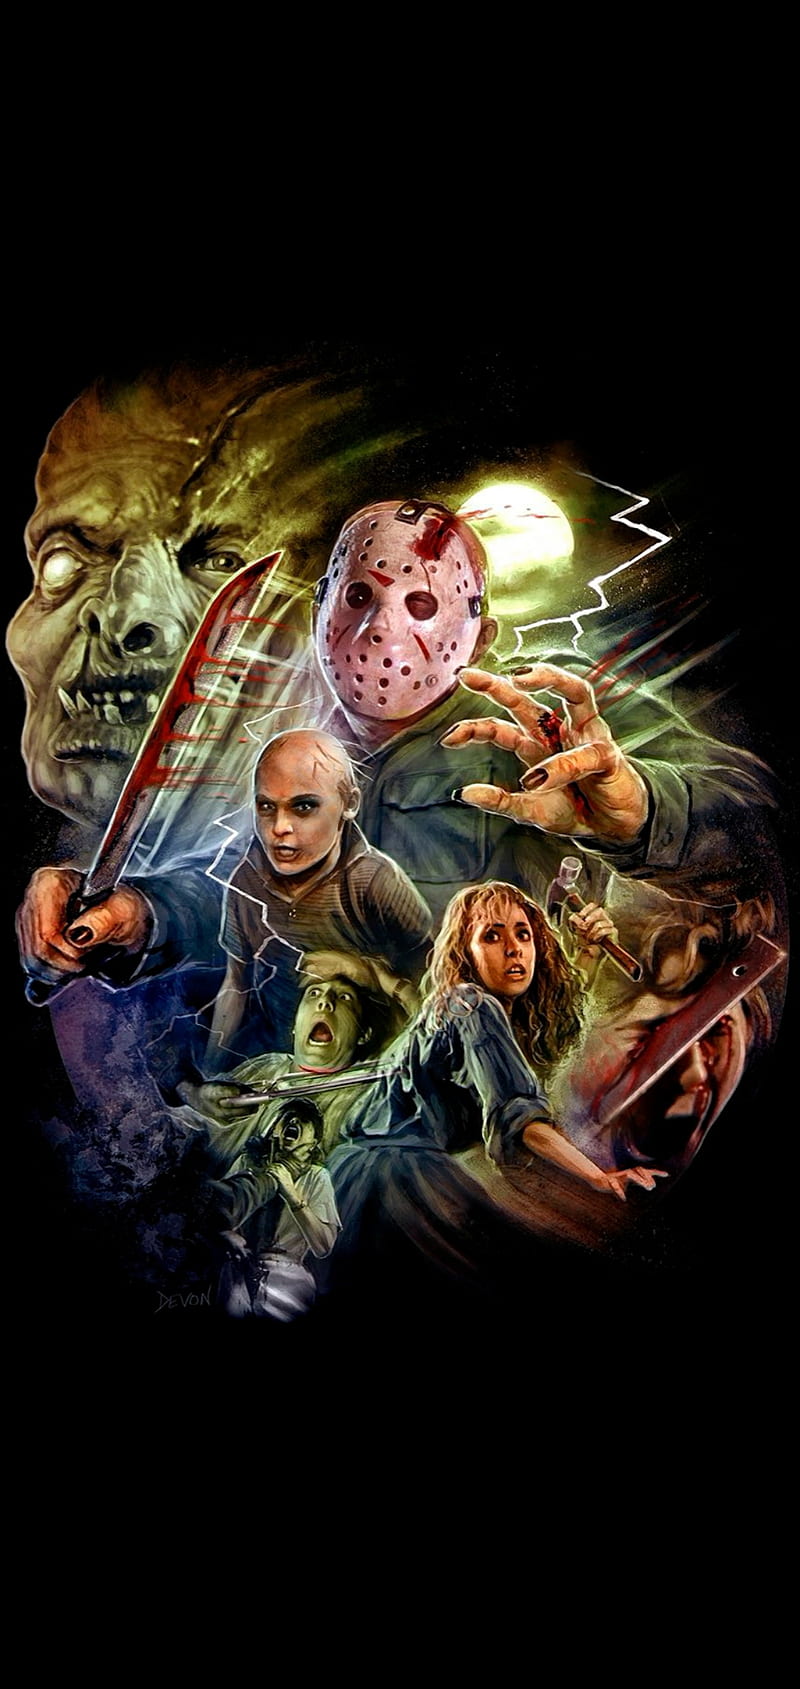 The Final Chapter, fan art, friday the 13th, horror movie, jason voorhees, HD phone wallpaper